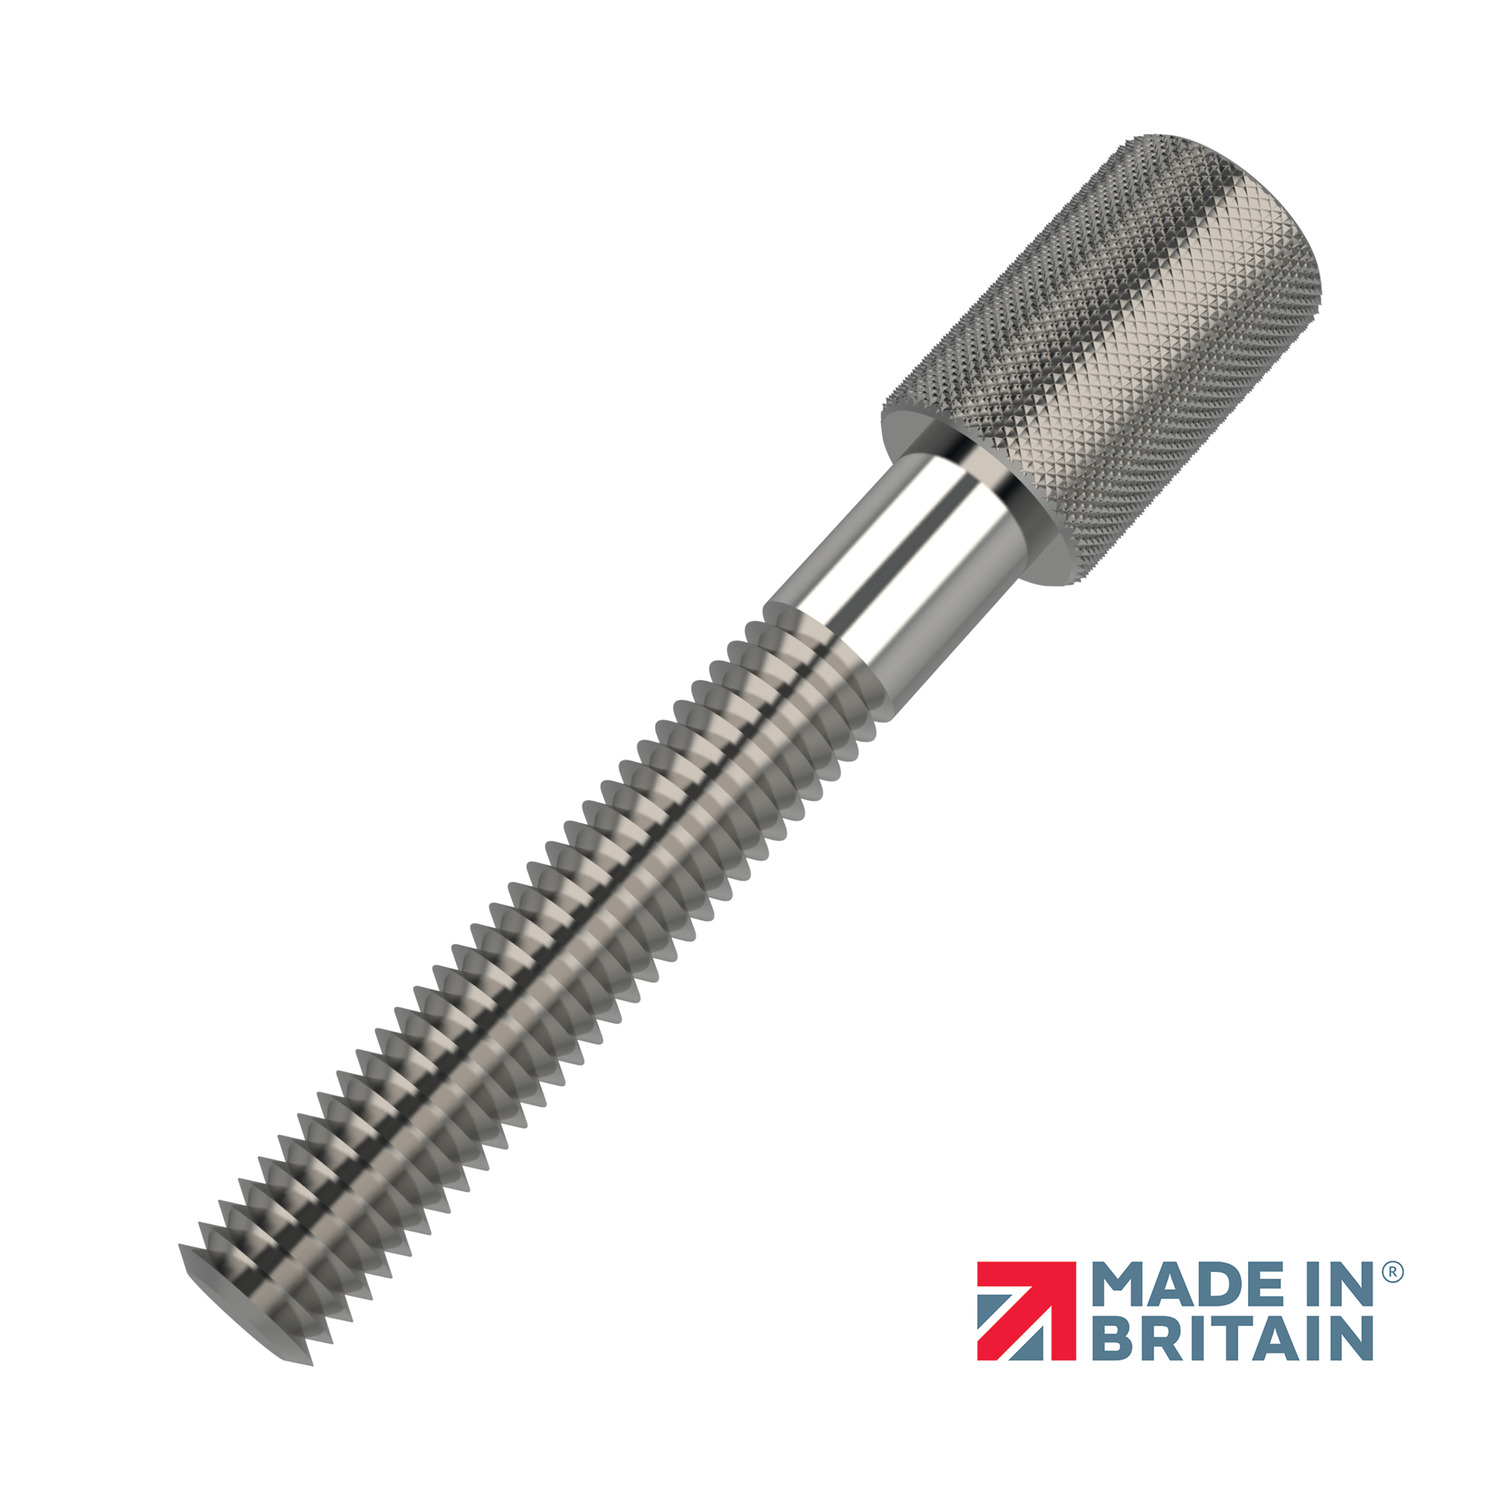 Thin Head Thumb Screws Offering a unique head with smaller diameter and greater length for grip. Ideal for tight spaces.